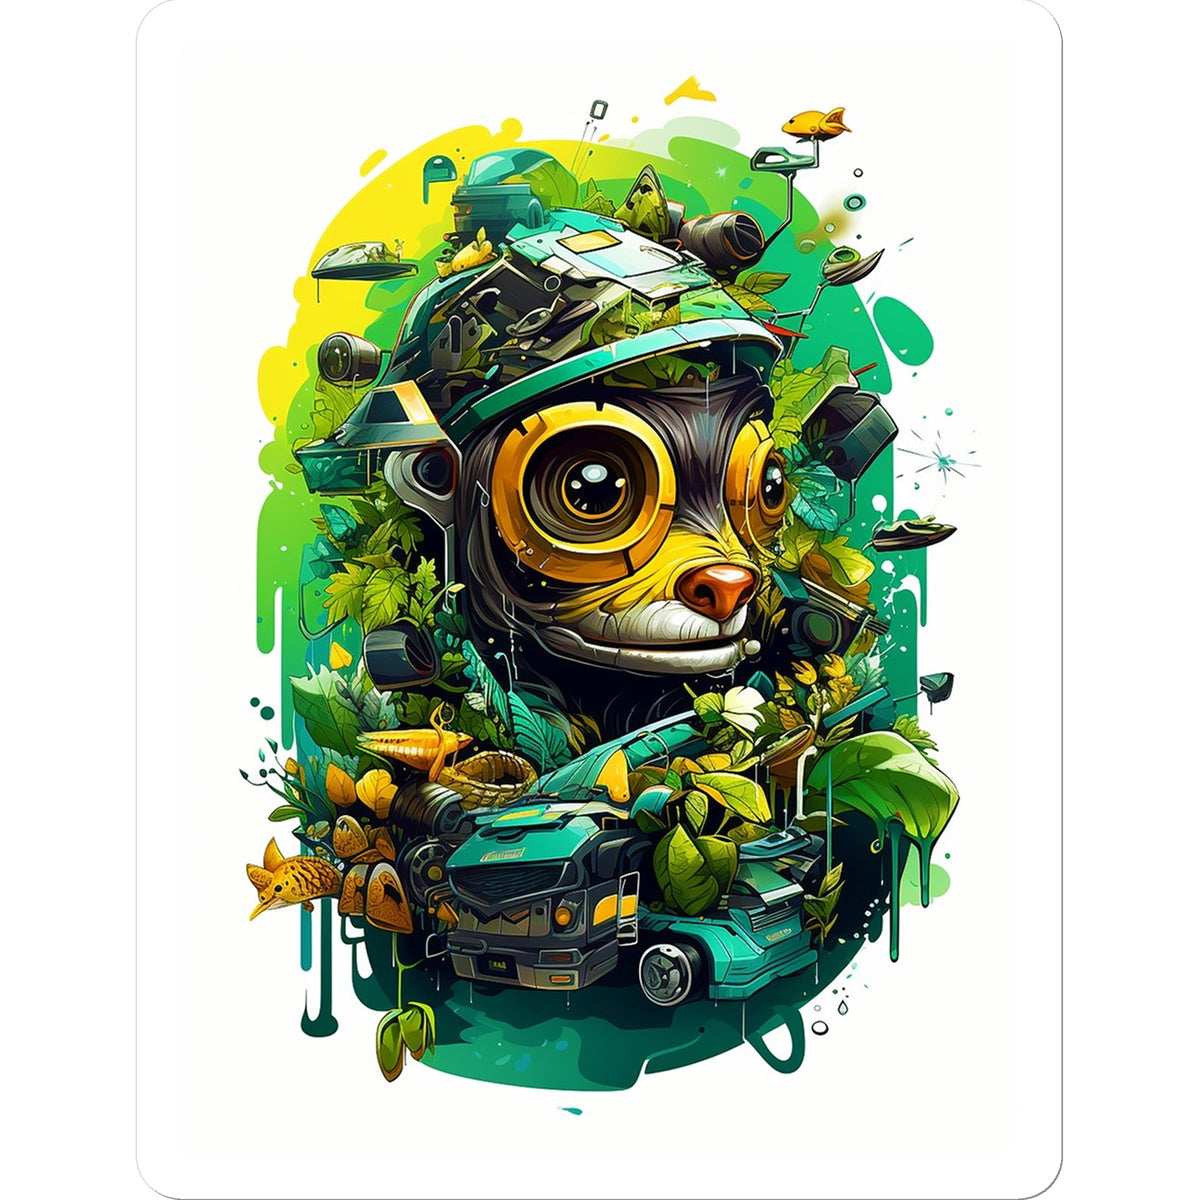 Nature's Resilience: Surreal Auto-Forest Artwork - Whimsical Raccoon and Greenery Infused Car  Sticker